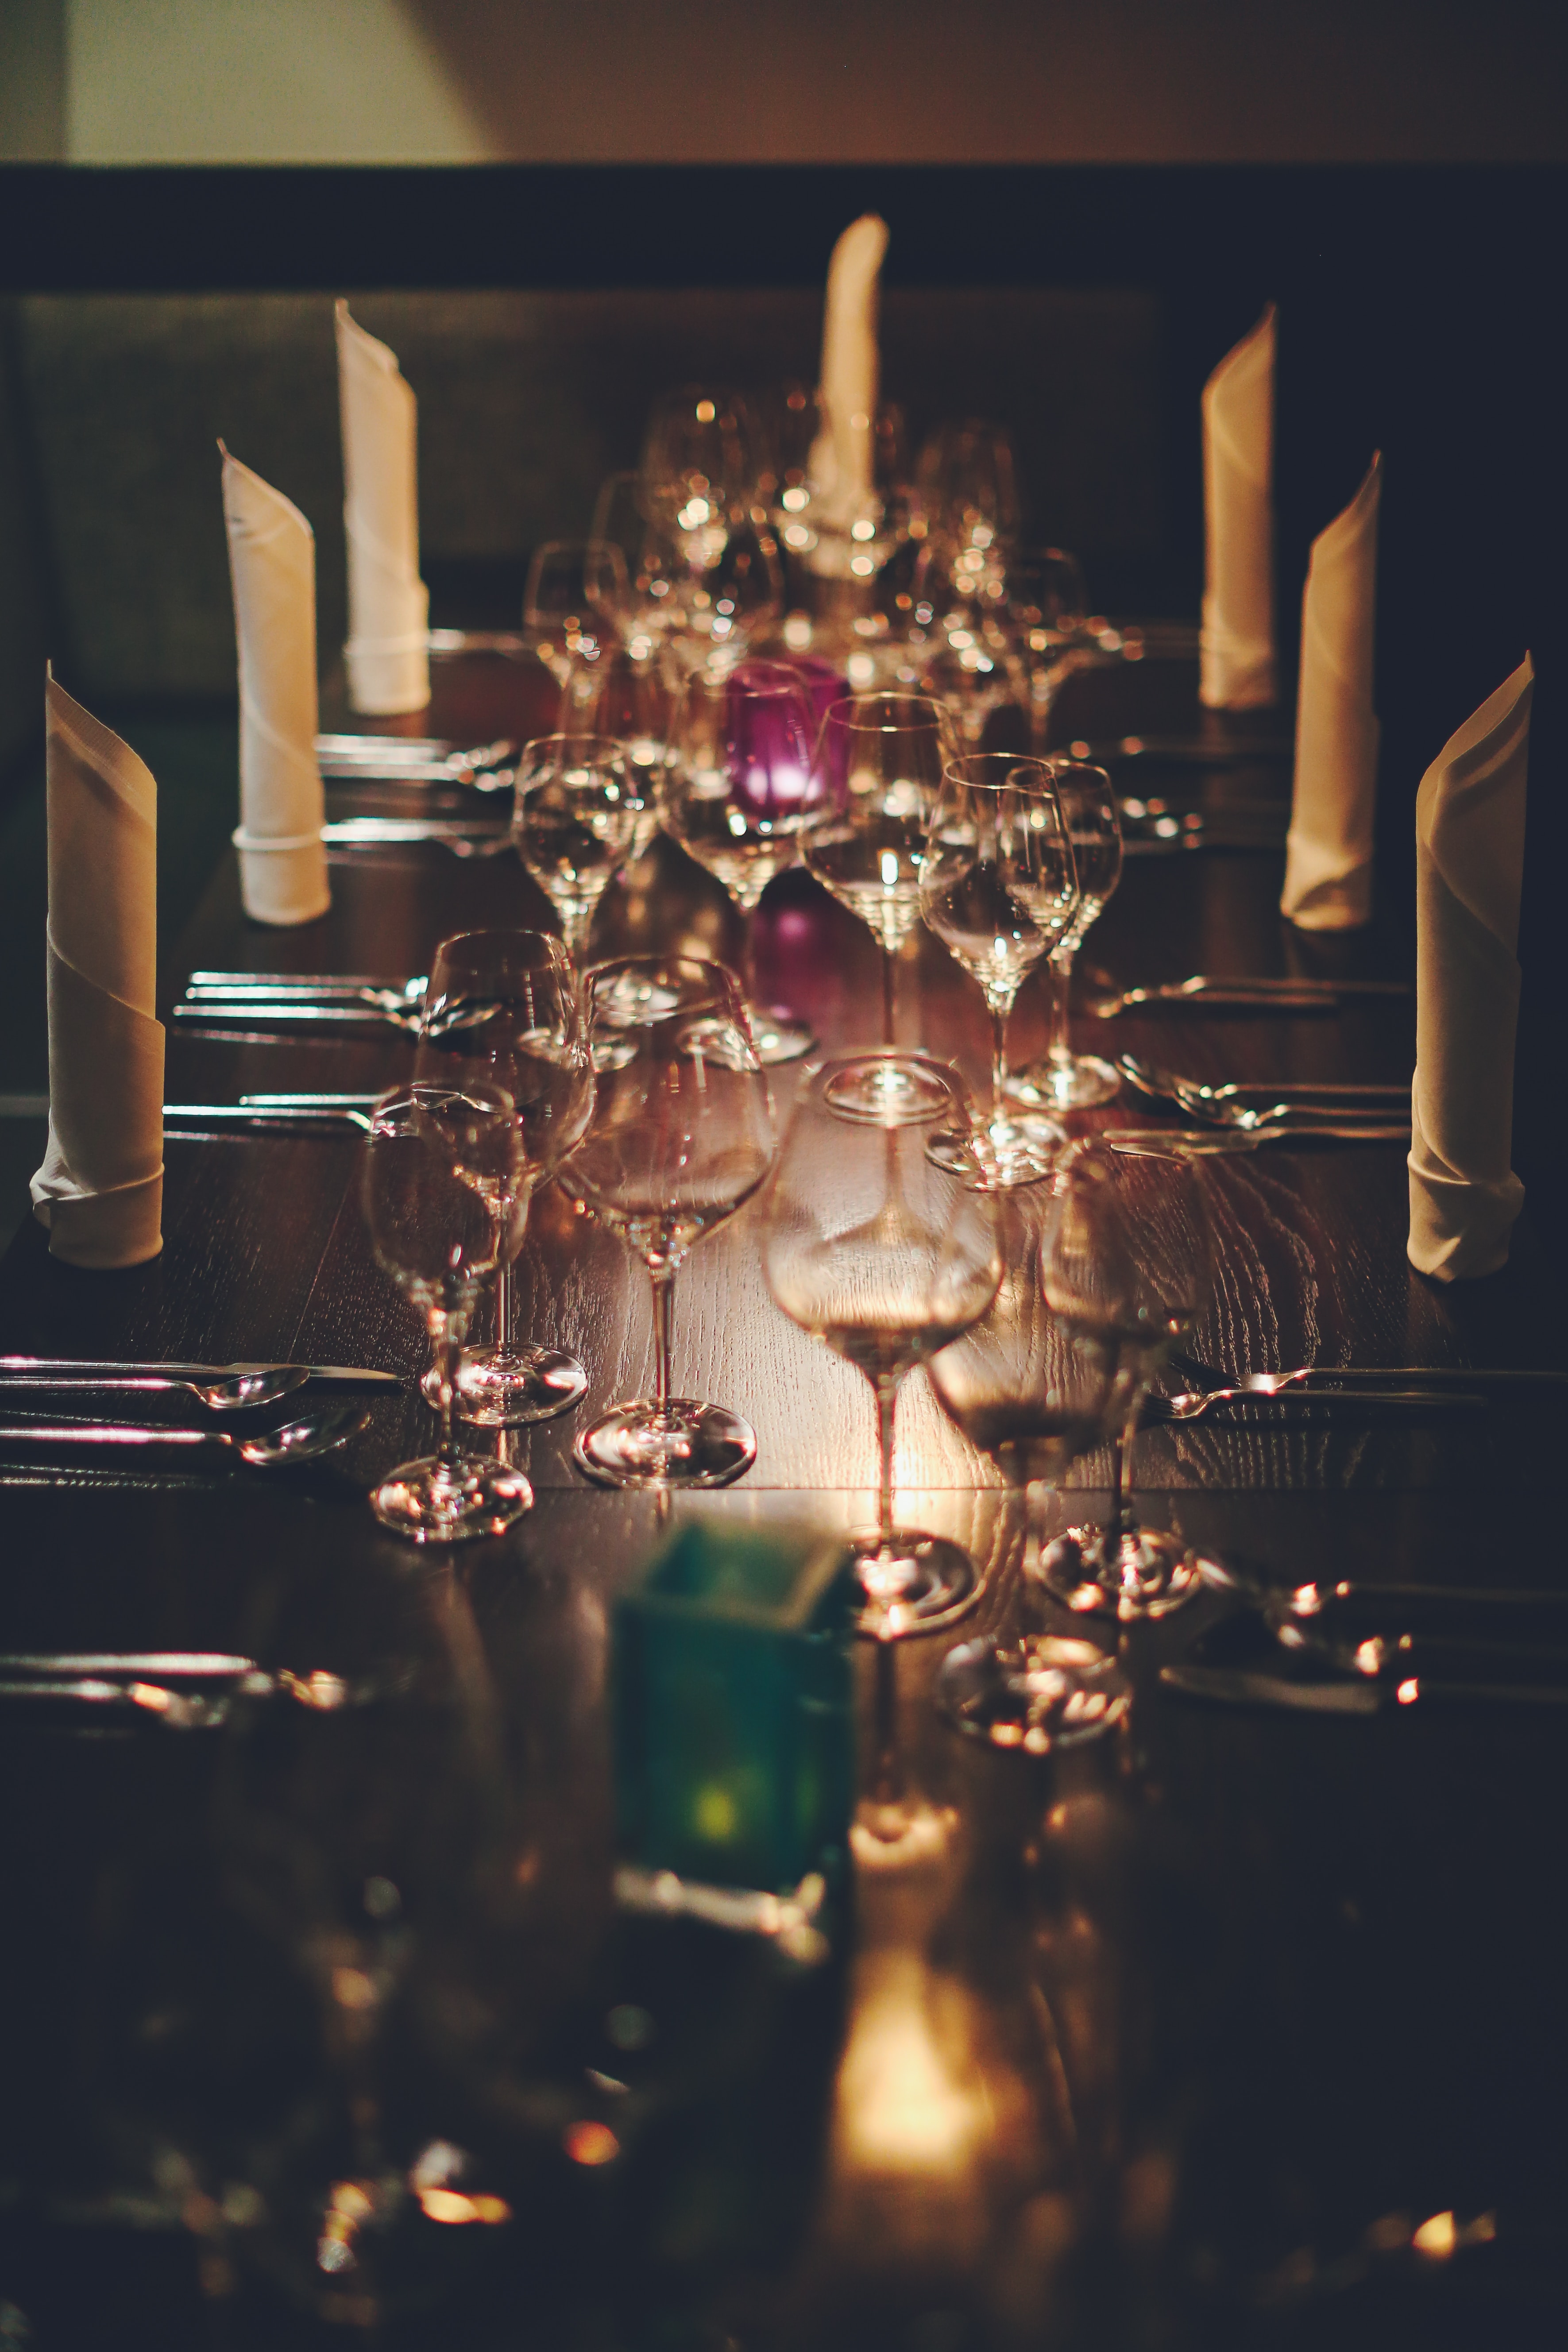 A exquisite table setting with carefully folded napkins and rows of wine glasses.